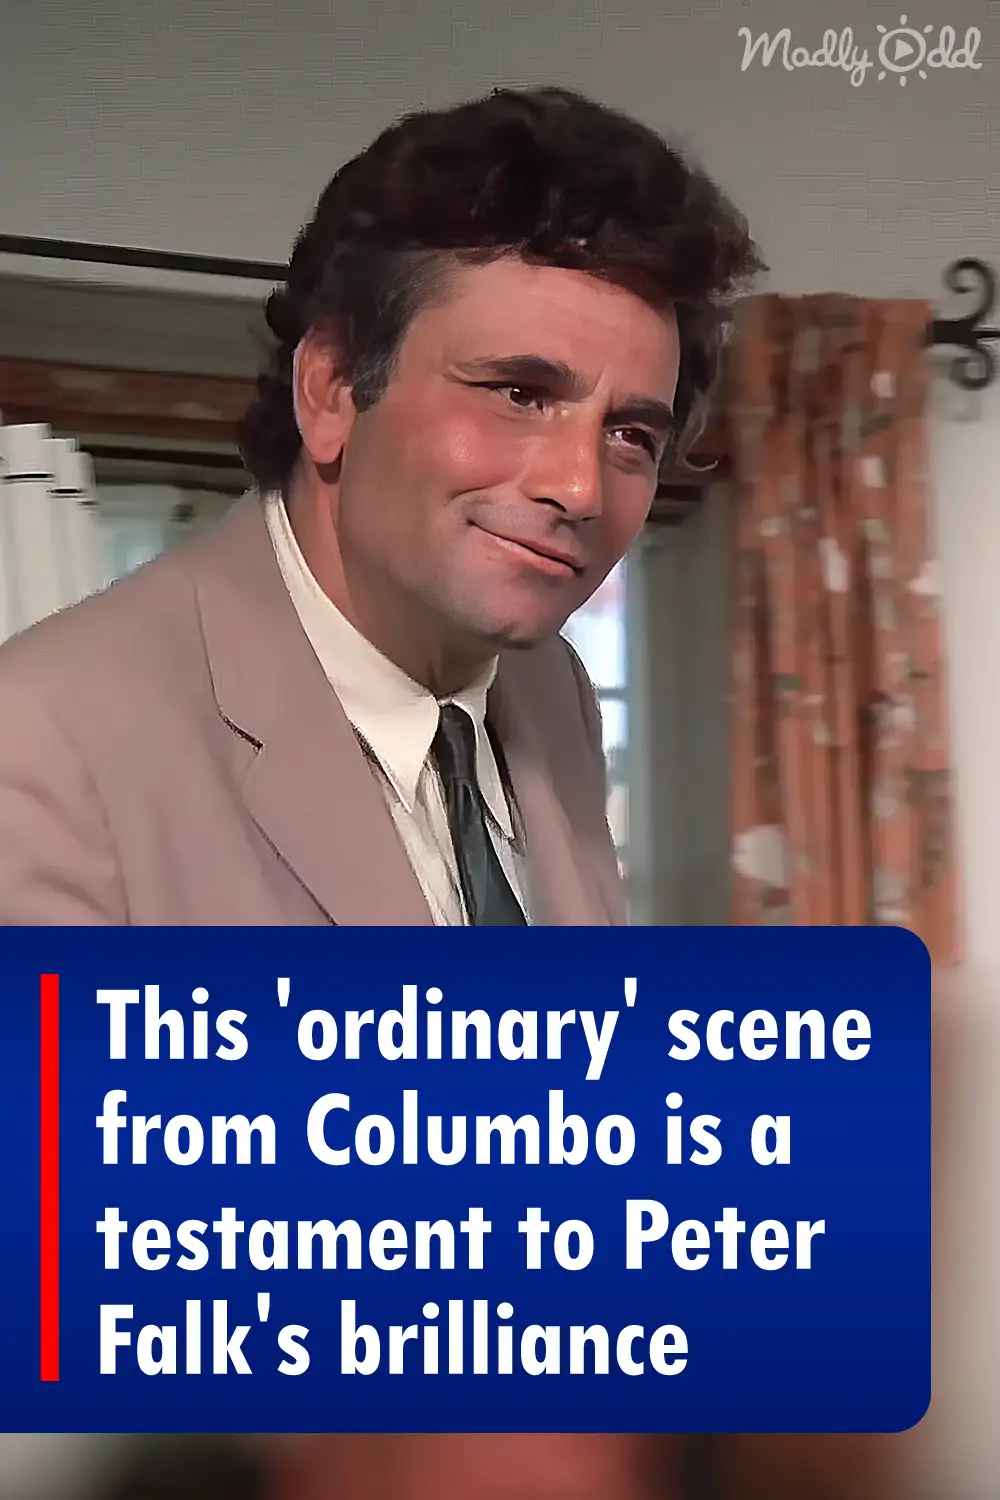 This 'ordinary' scene from Columbo is a testament to Peter Falk's brilliance